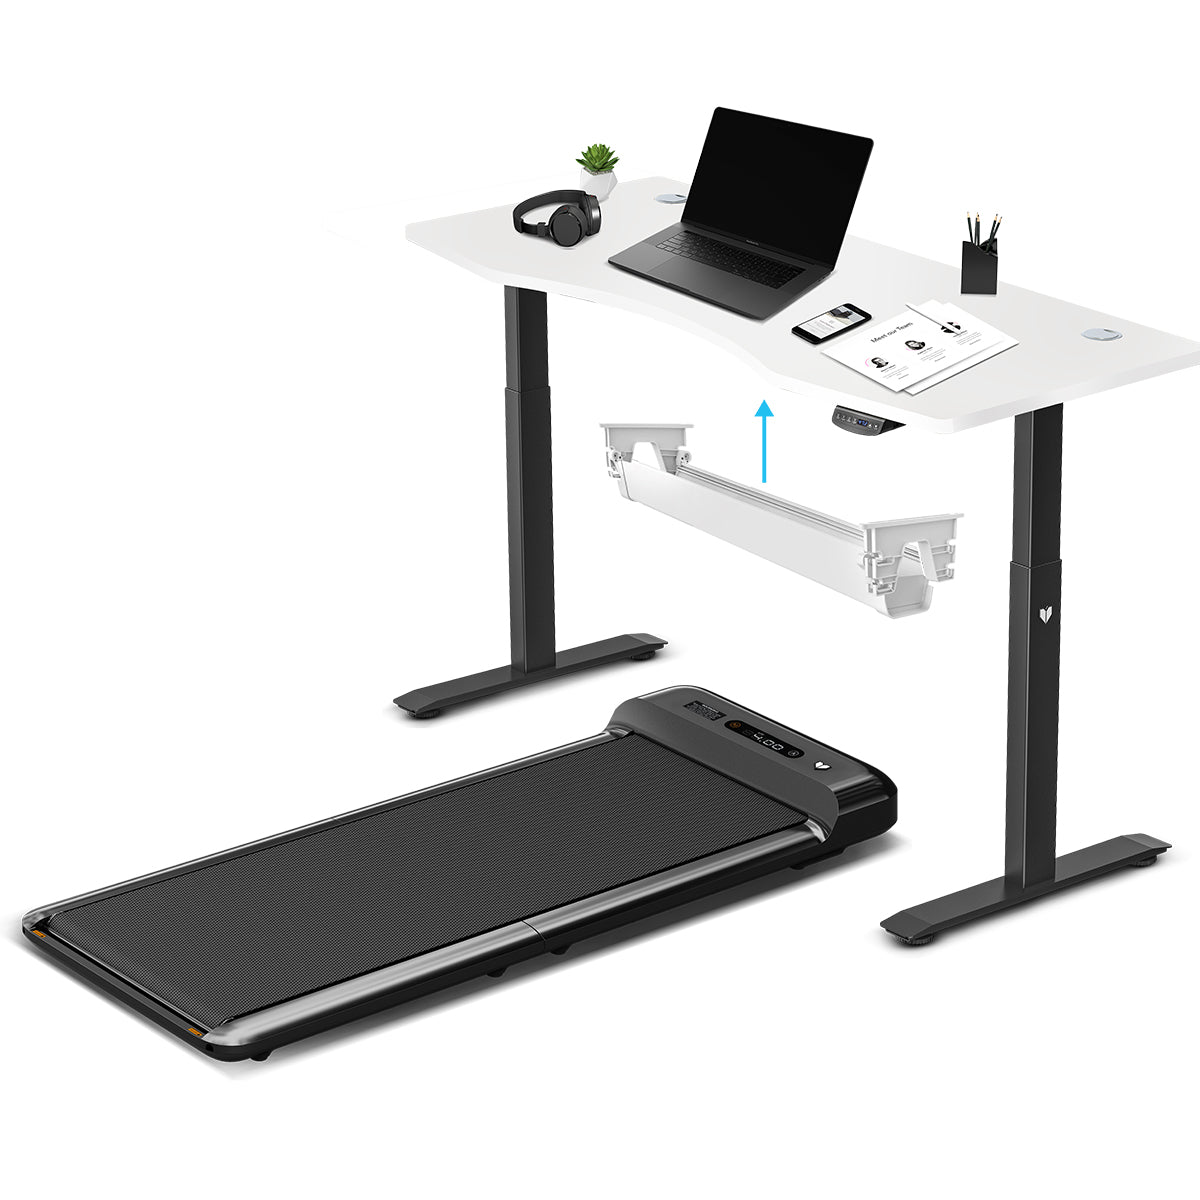 Lifespan Fitness WalkingPad M2 Treadmill with ErgoDesk Automatic White Standing Desk 1500mm + Cable Management Tray